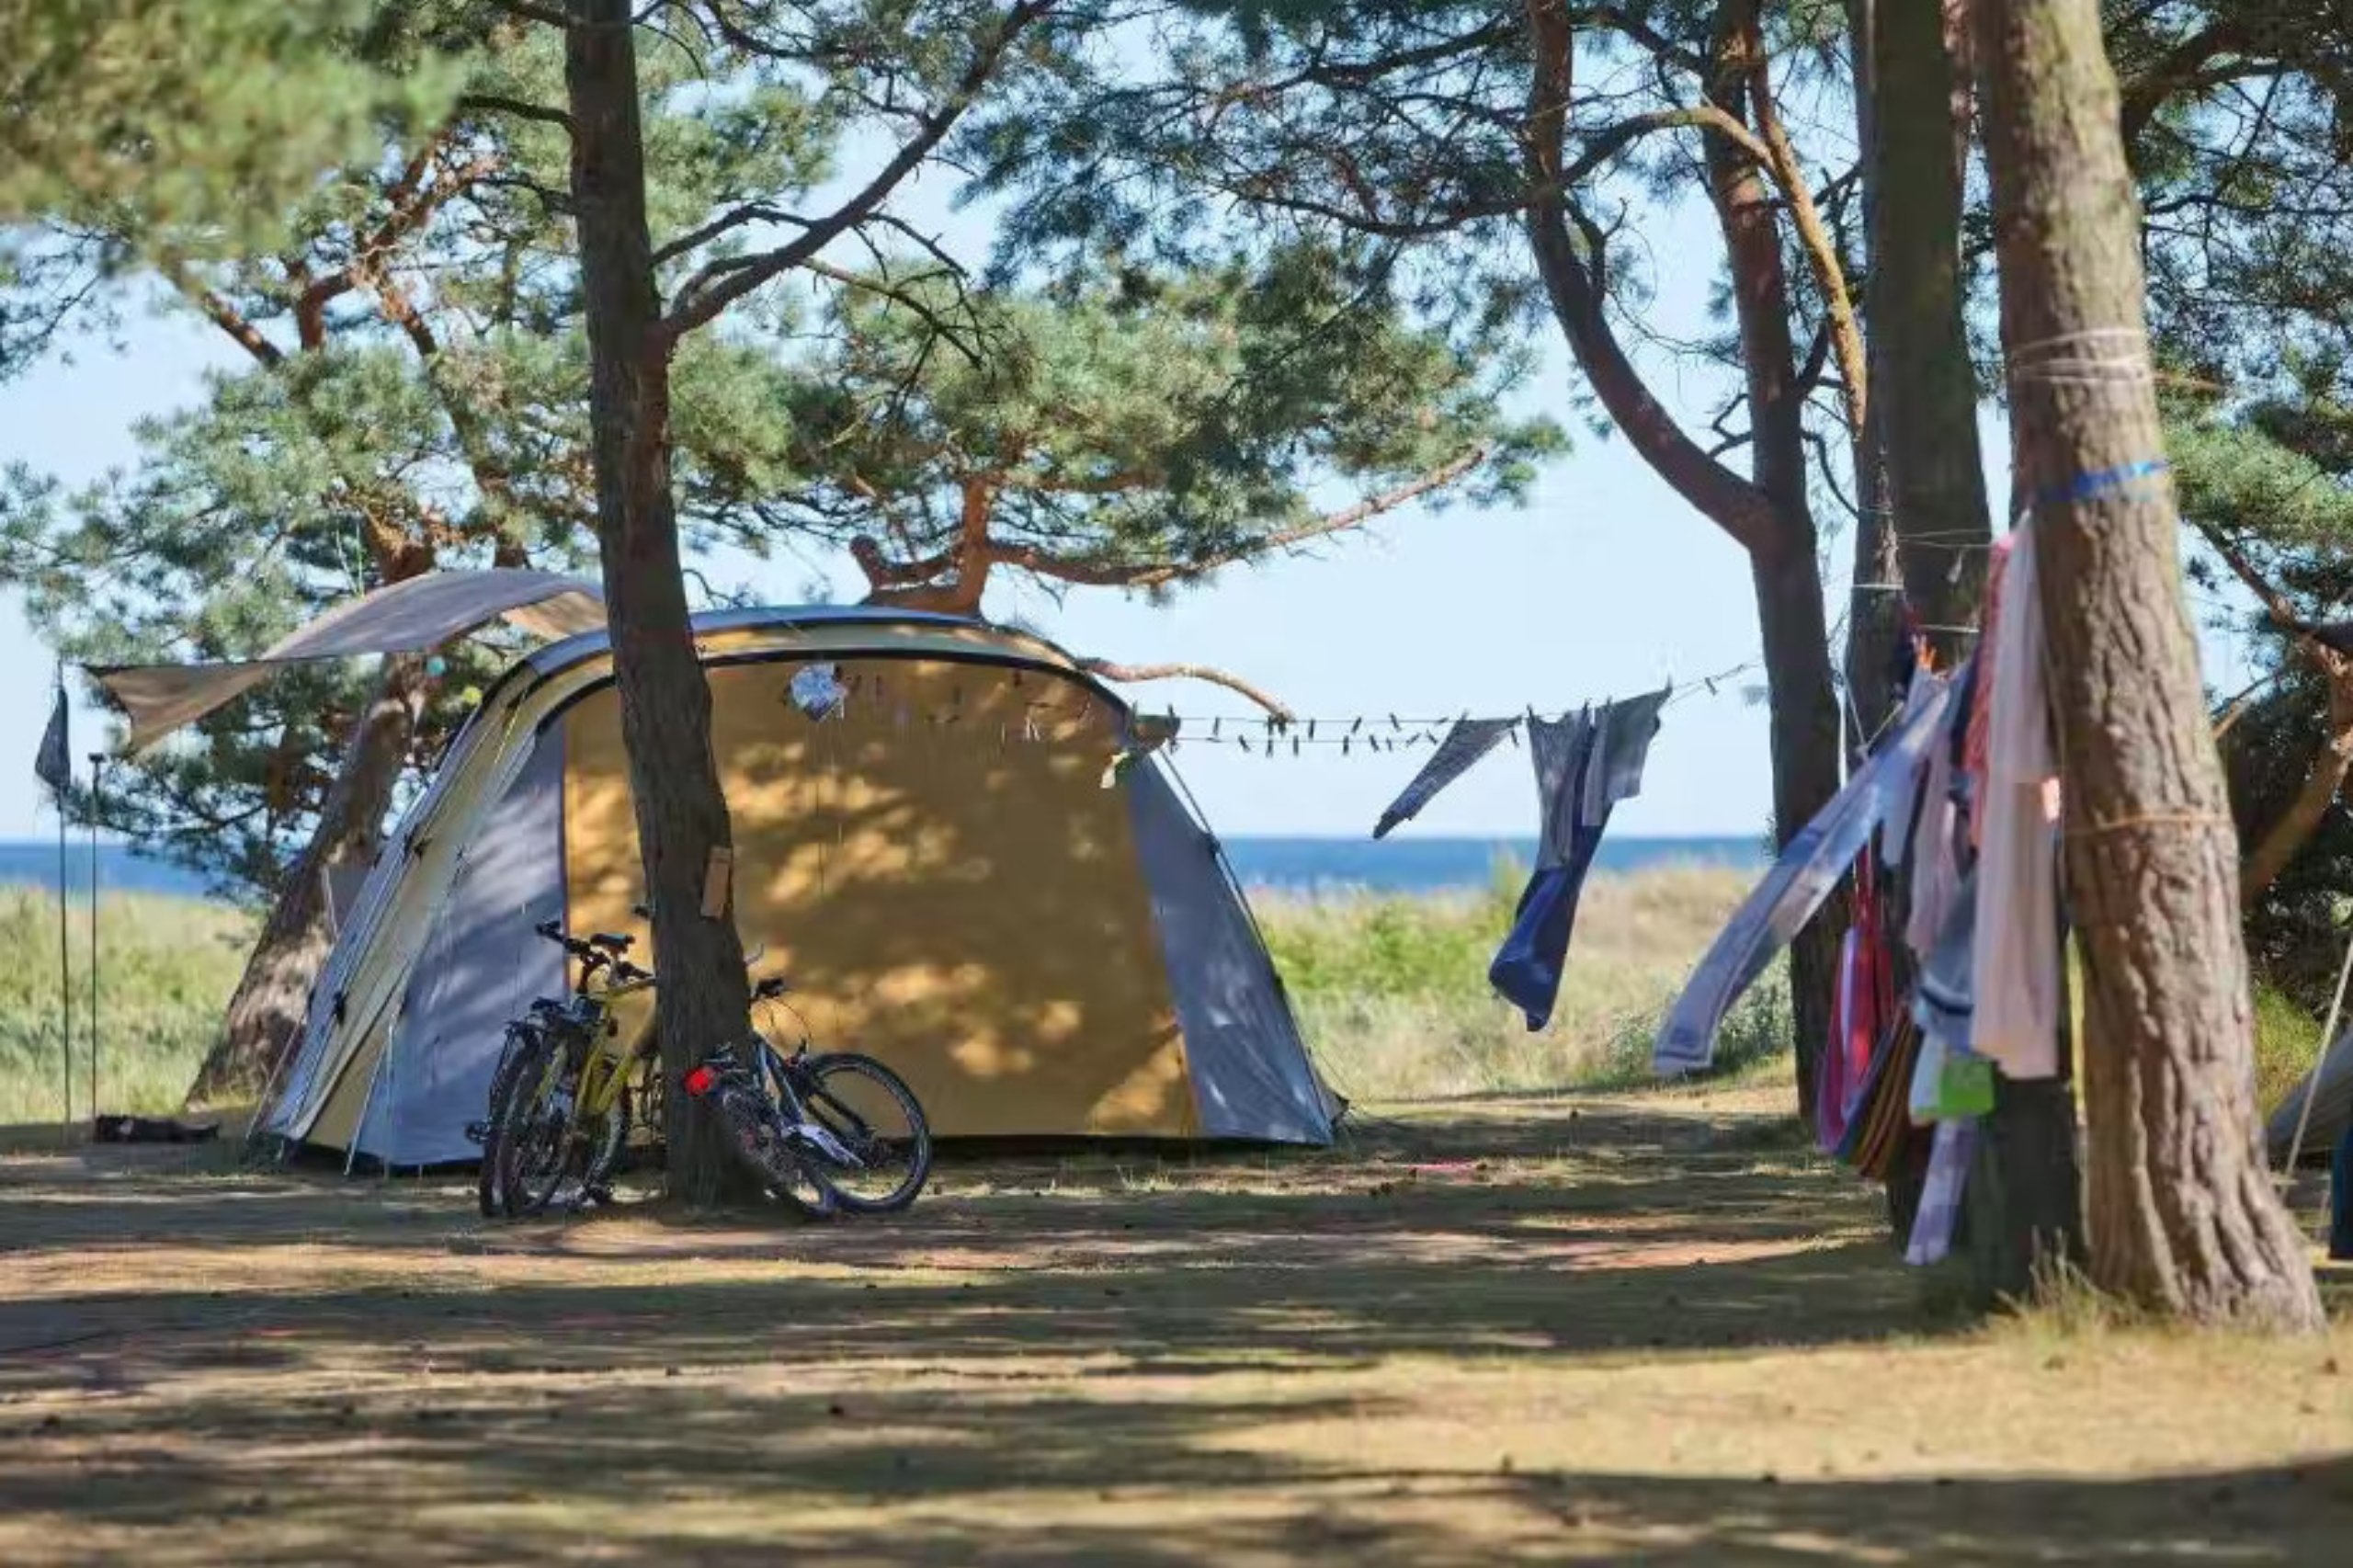 The pitches at Dueodde Familiecamping are surrounded by trees providing shade and sand dunes.